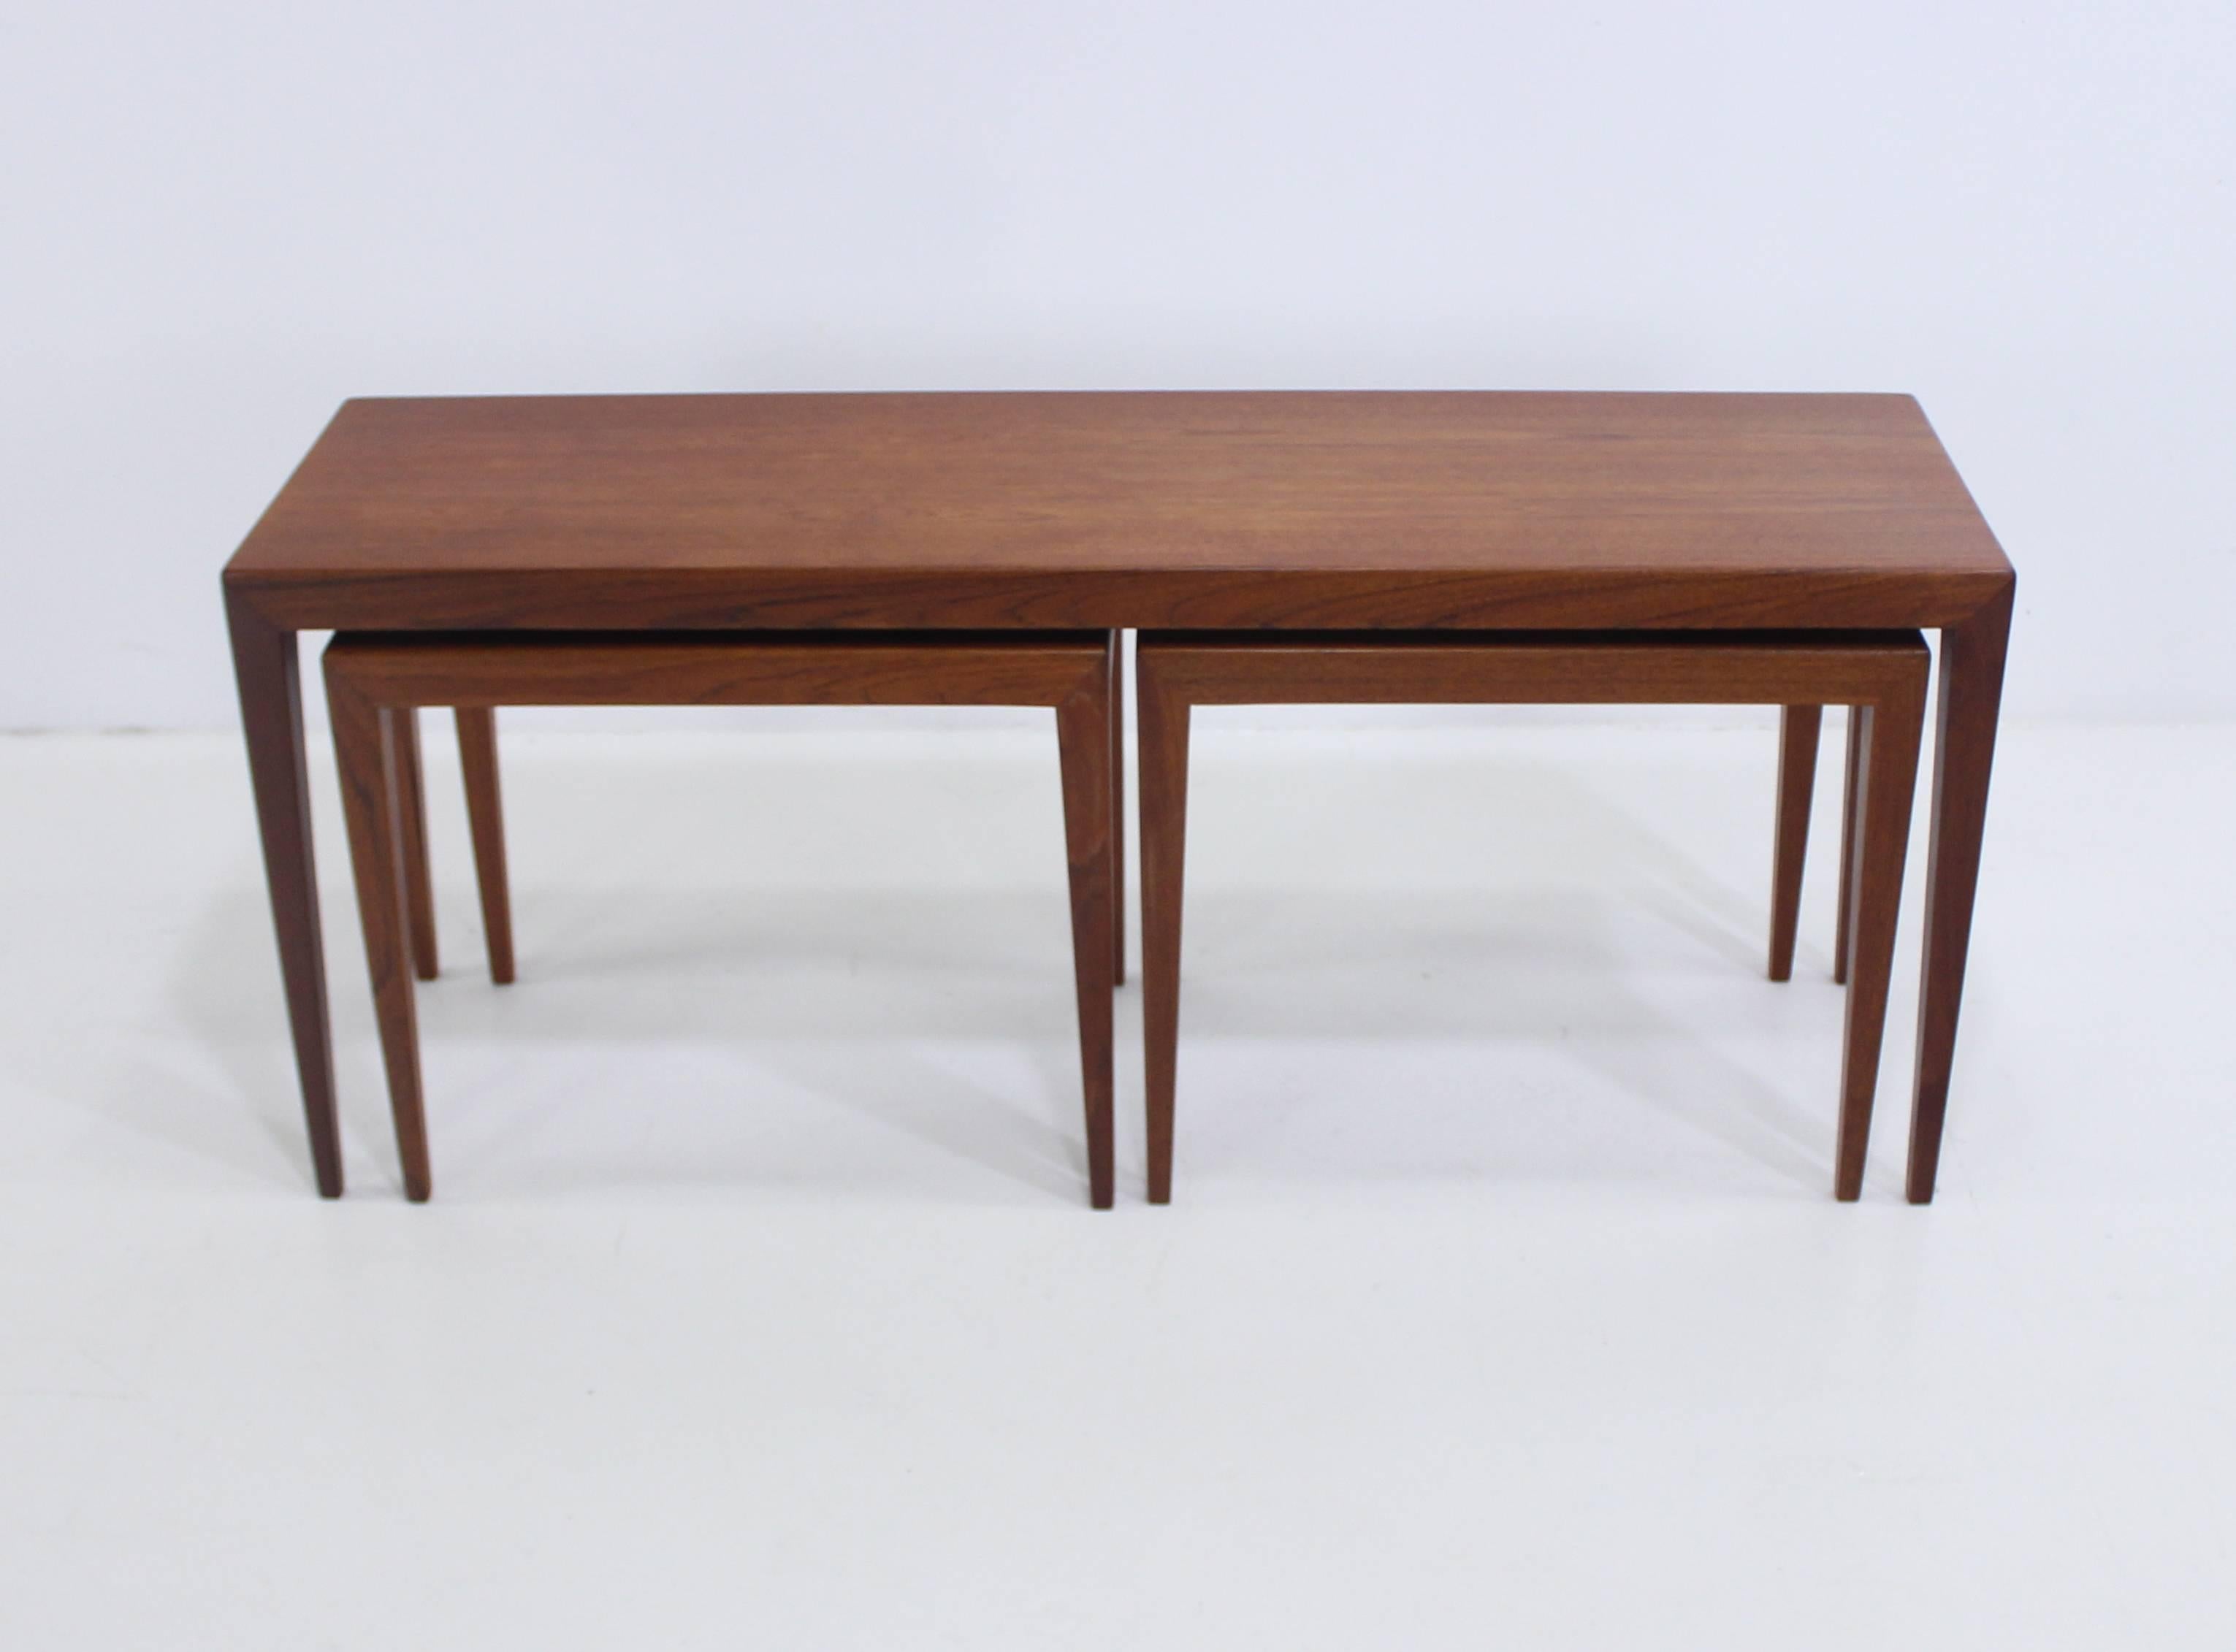 Three nesting tables designed by Severin Hansen.
Matchless Minimalist style.
Two smaller tables measuring 19.5" W x 12.5" D x 16.25" H, neatly slide under larger table.
Richly grained teak.
Beautifully beveled